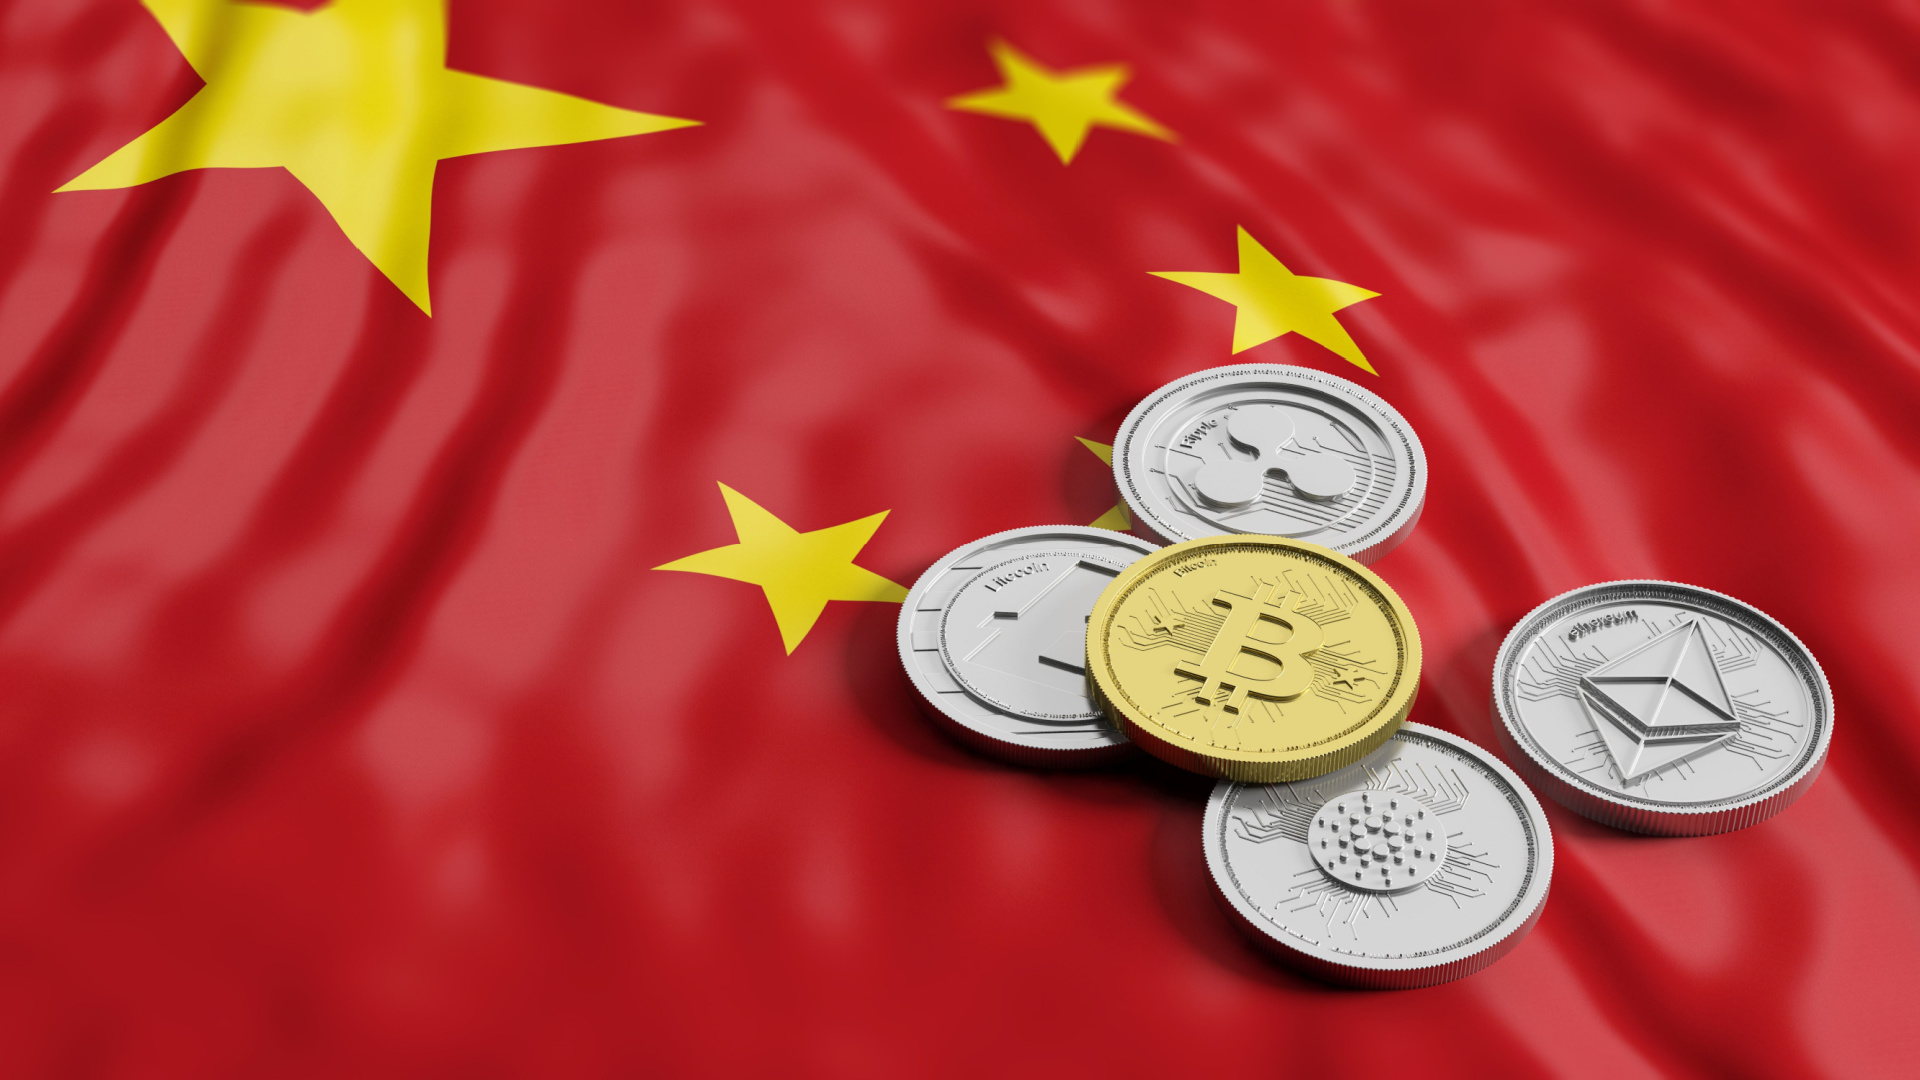 Reminder for Mining Ban from China After Bitcoin Halving!